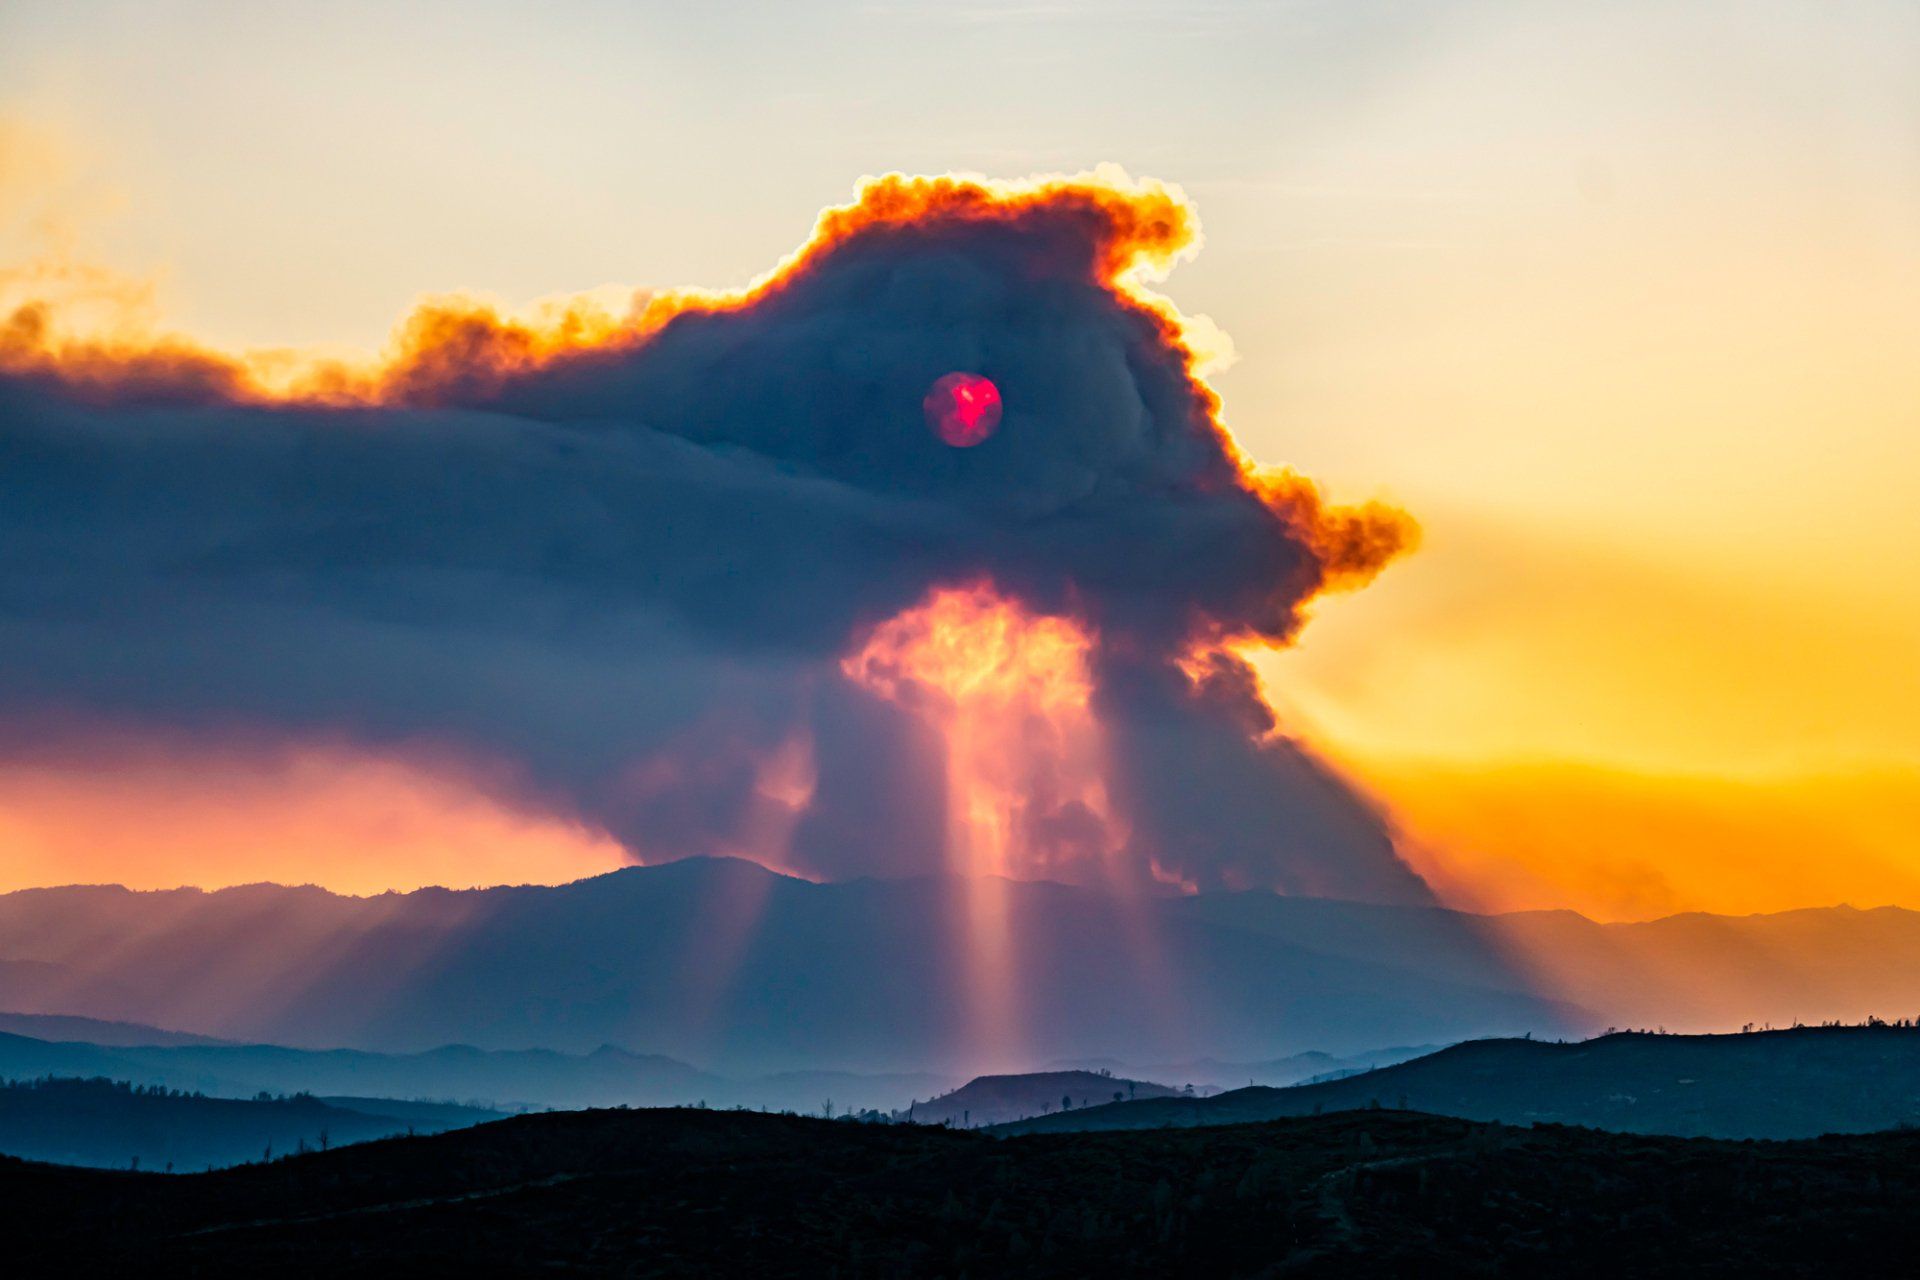 Sunset on the Kincade Fire in Sonoma County, California.